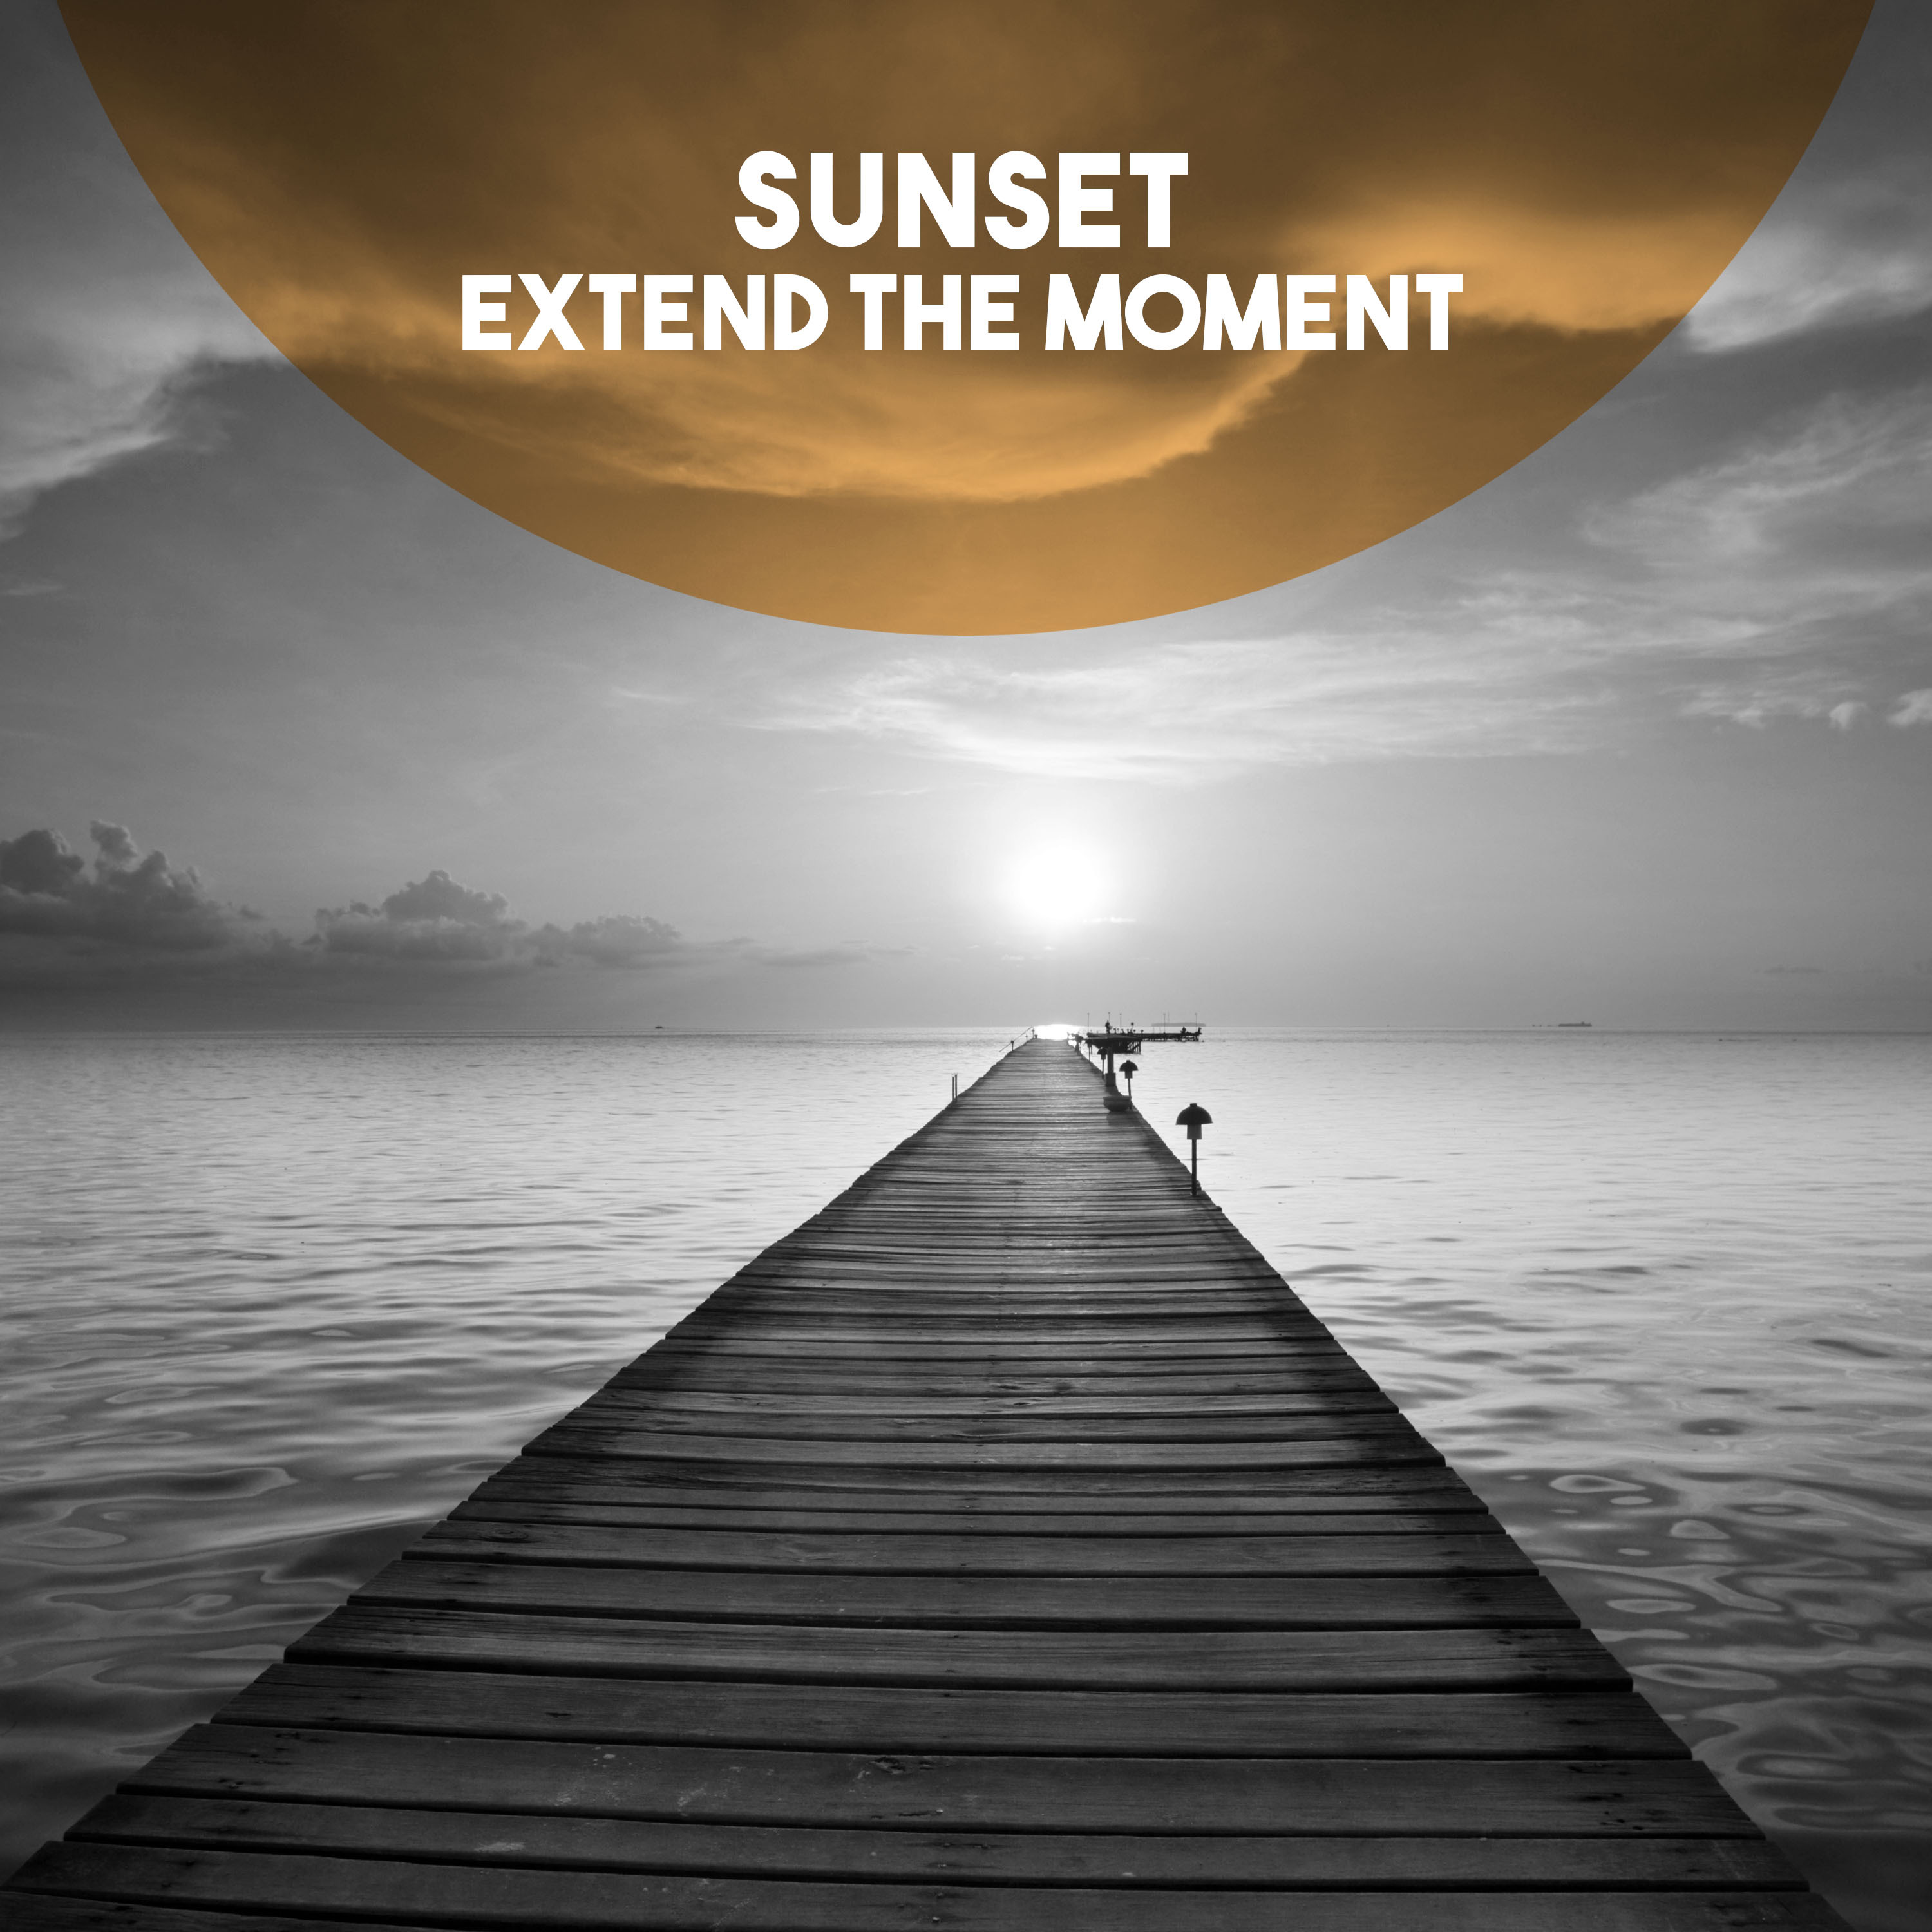 Sunset: Extend the Moment